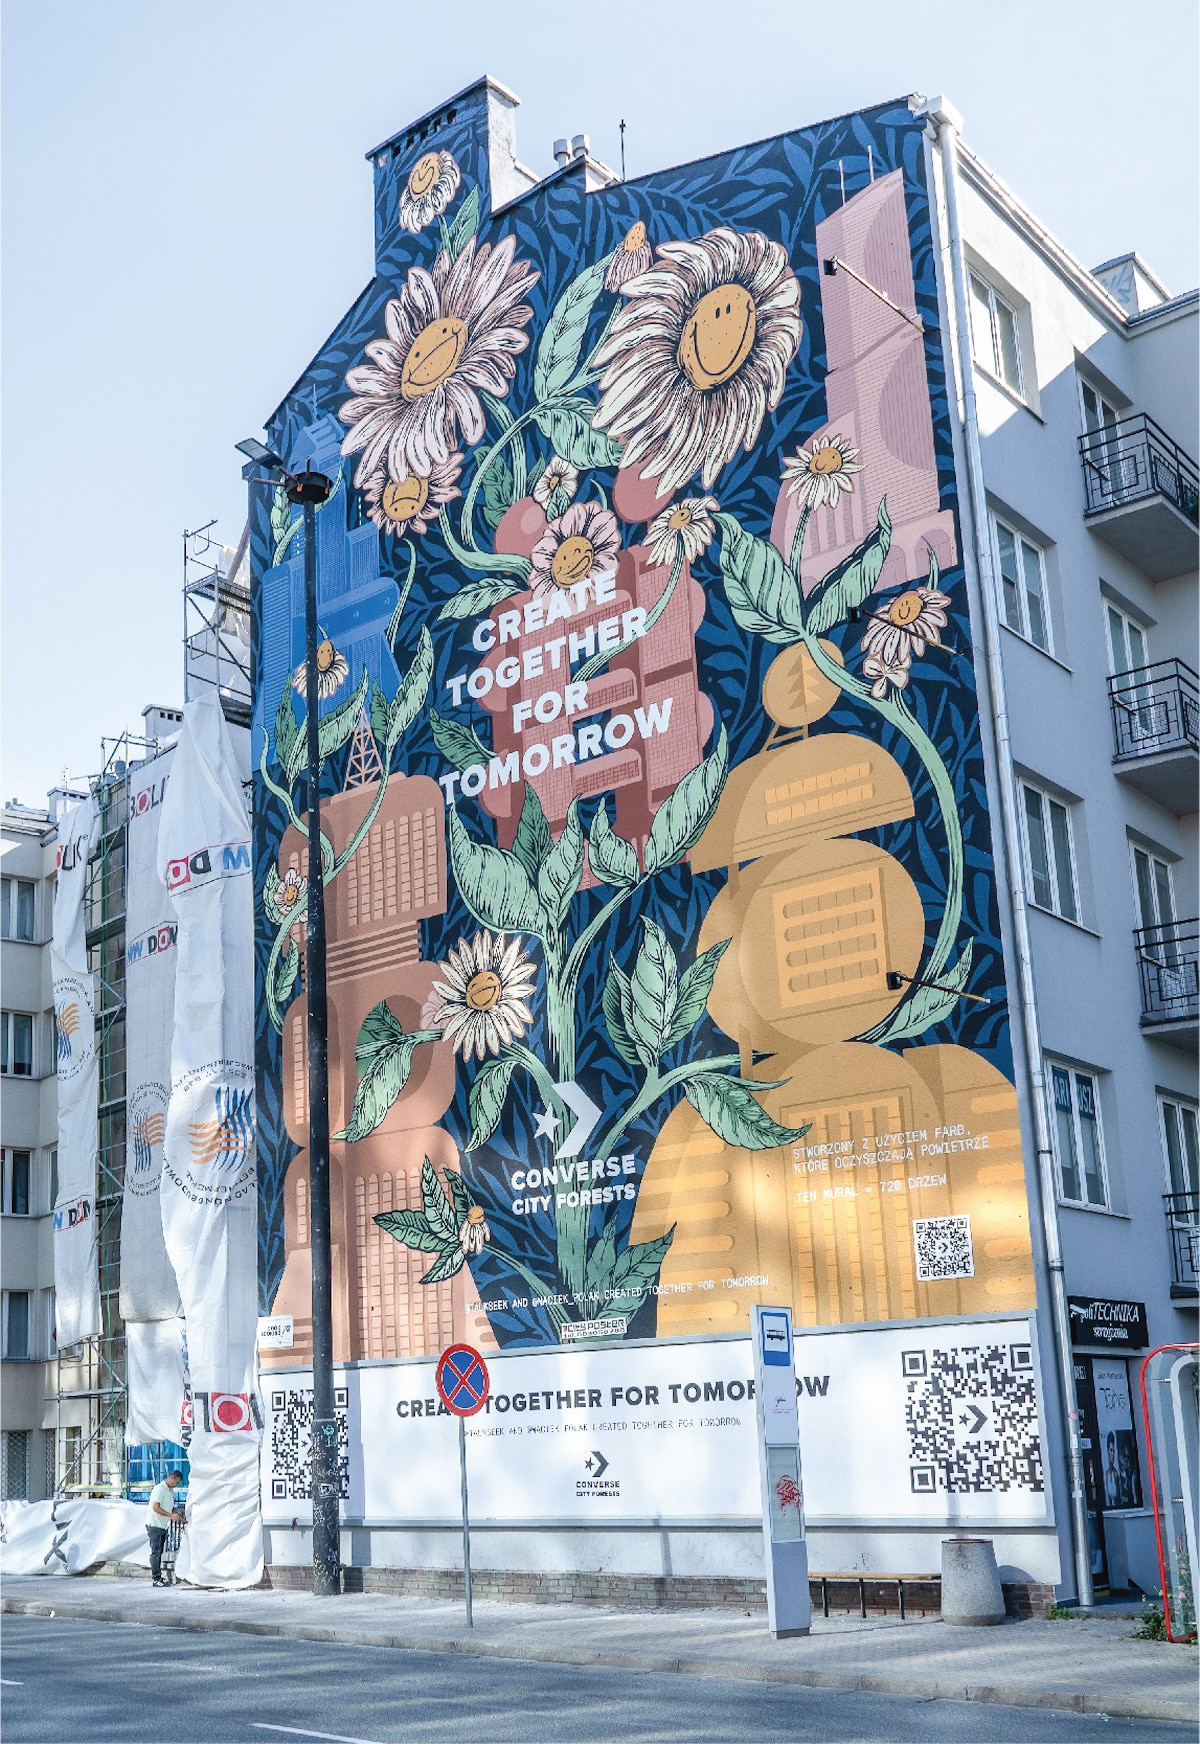 As such, the Warsaw mural has had the same effect as planting 720 trees. Globally, meanwhile, the overall project would be the equivalent of Converse planting 3,000 trees.